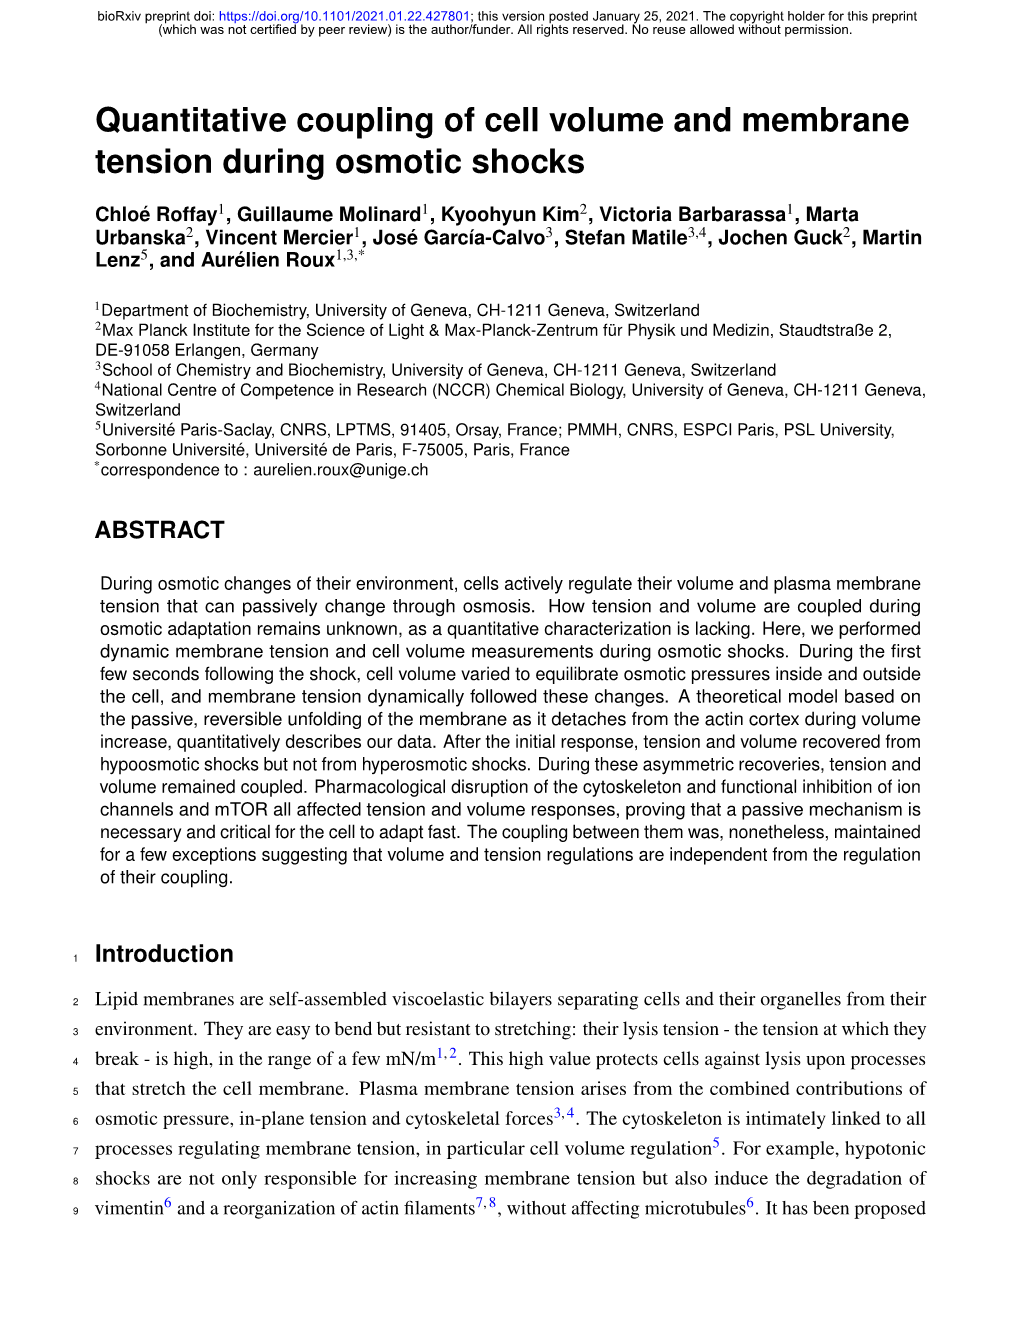 Quantitative Coupling of Cell Volume and Membrane Tension During Osmotic Shocks